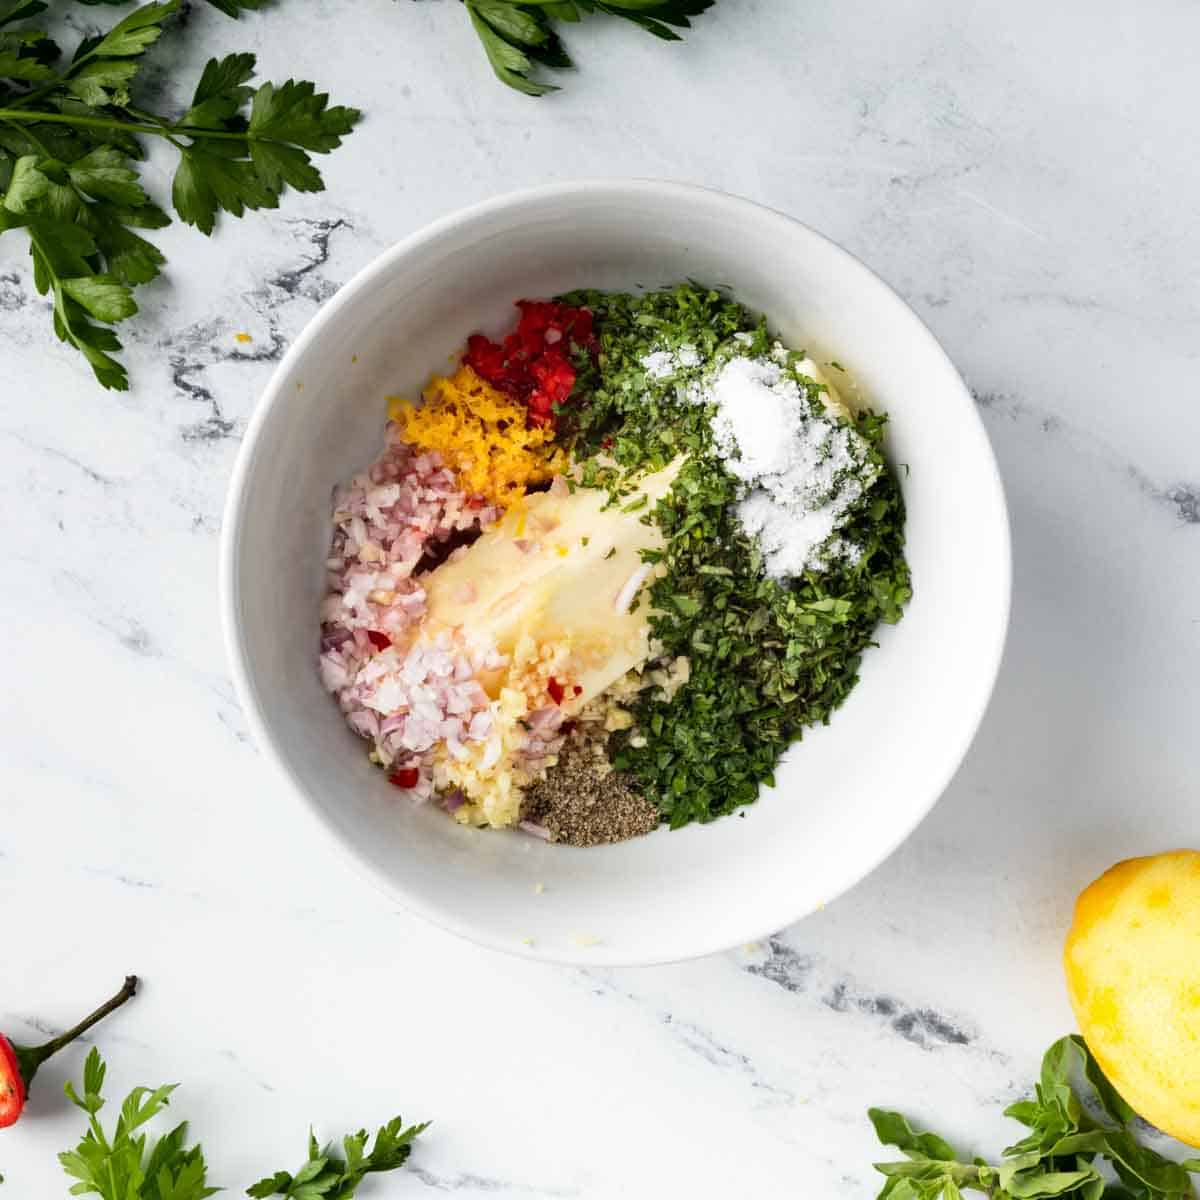 Butter and finely minced chimichurri ingredients in a bowl